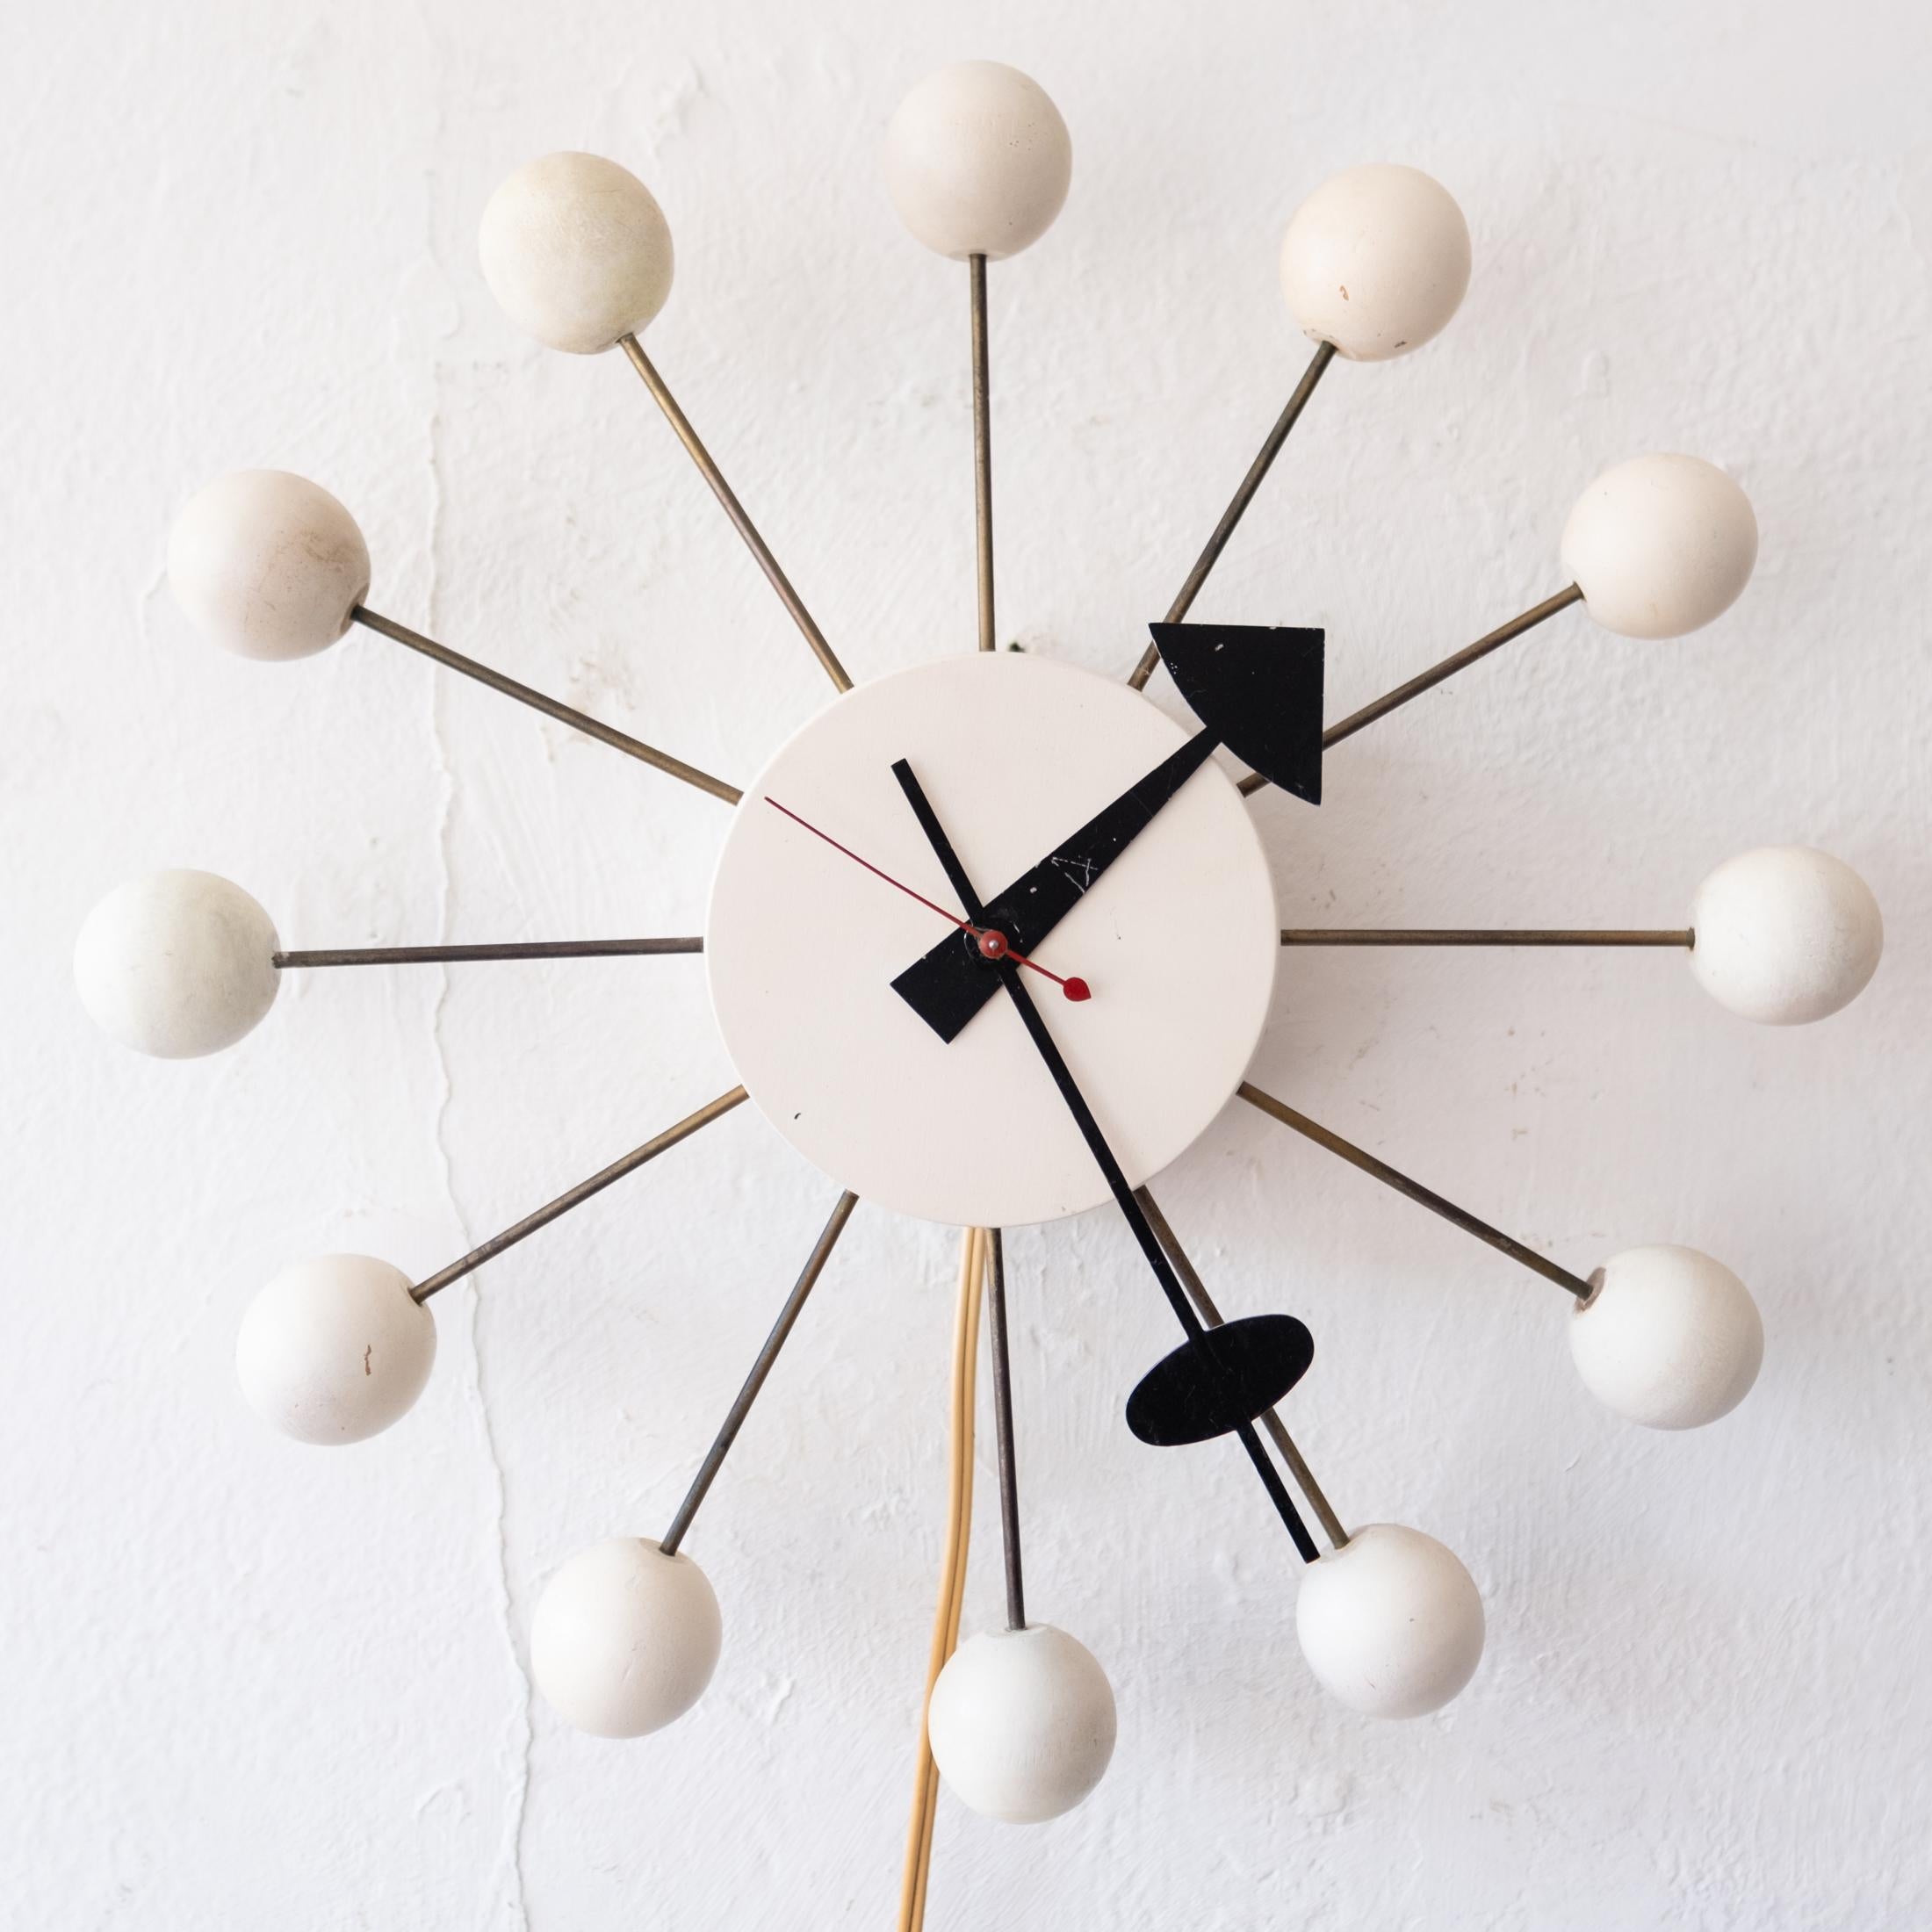 Vintage Isamu Noguchi and George Nelson Ball Clock. Produced by Howard Miller, with original tag. Designed in 1946.  Runs well and retains the original hands, including the second hand (which is often missing).  

From George Nelson: The Design of